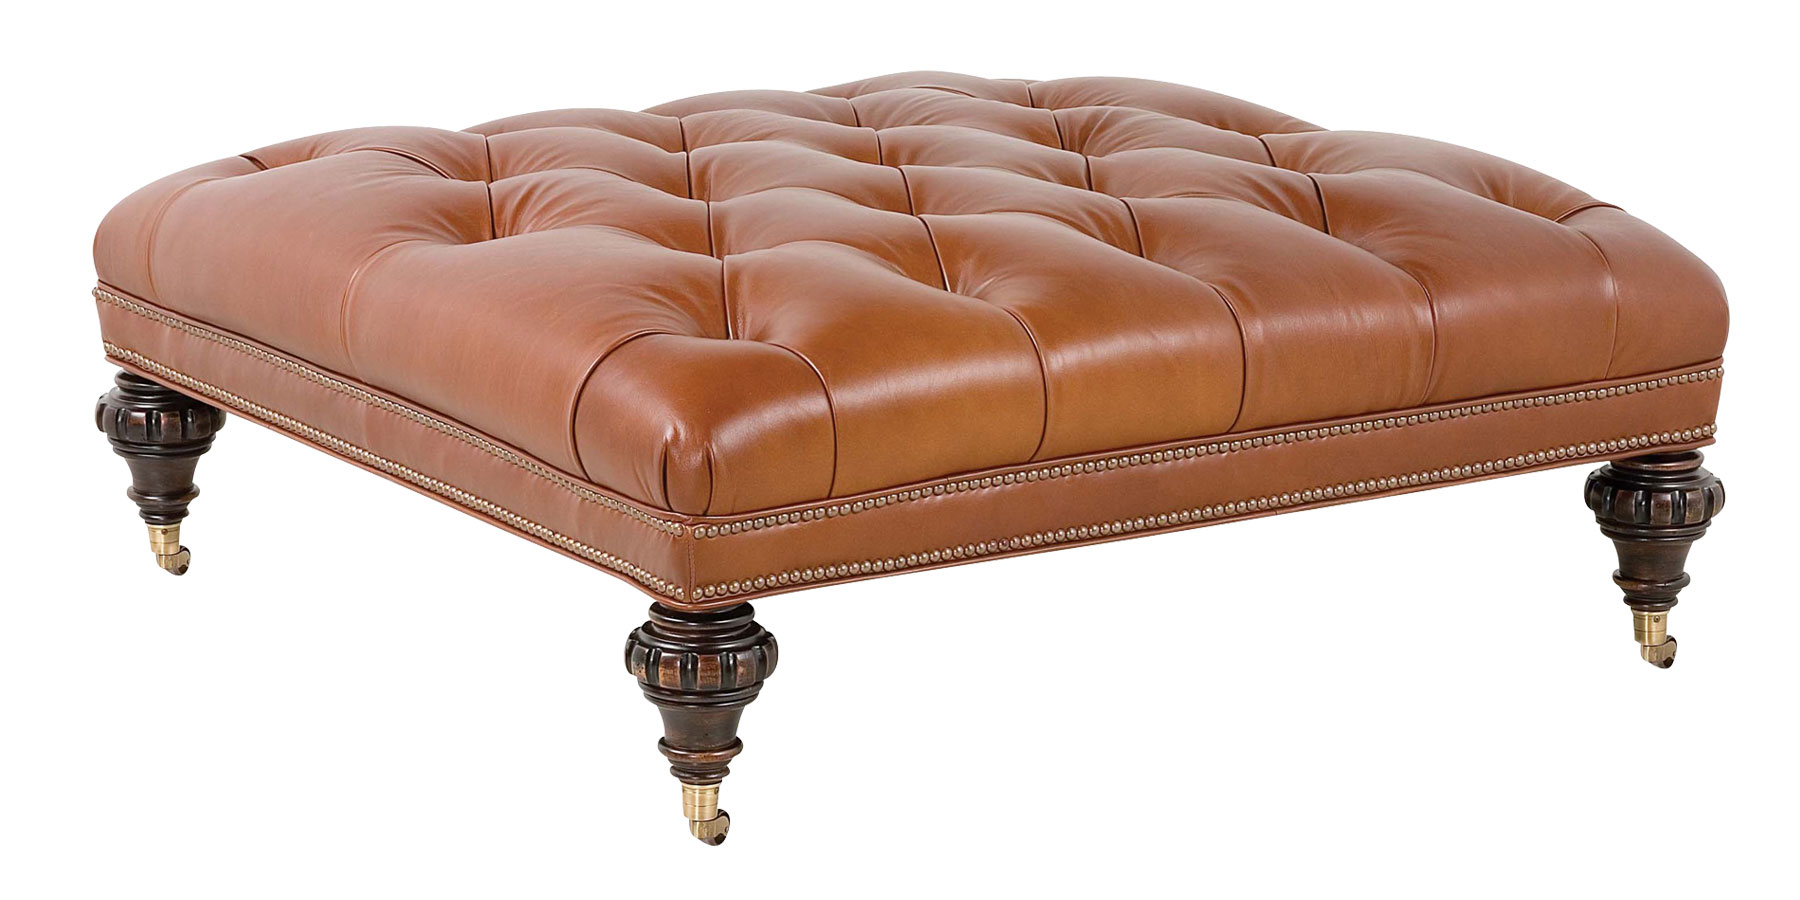 Unique And Creative Tufted Leather Ottoman Coffee Table Homesfeed in proportions 1800 X 900